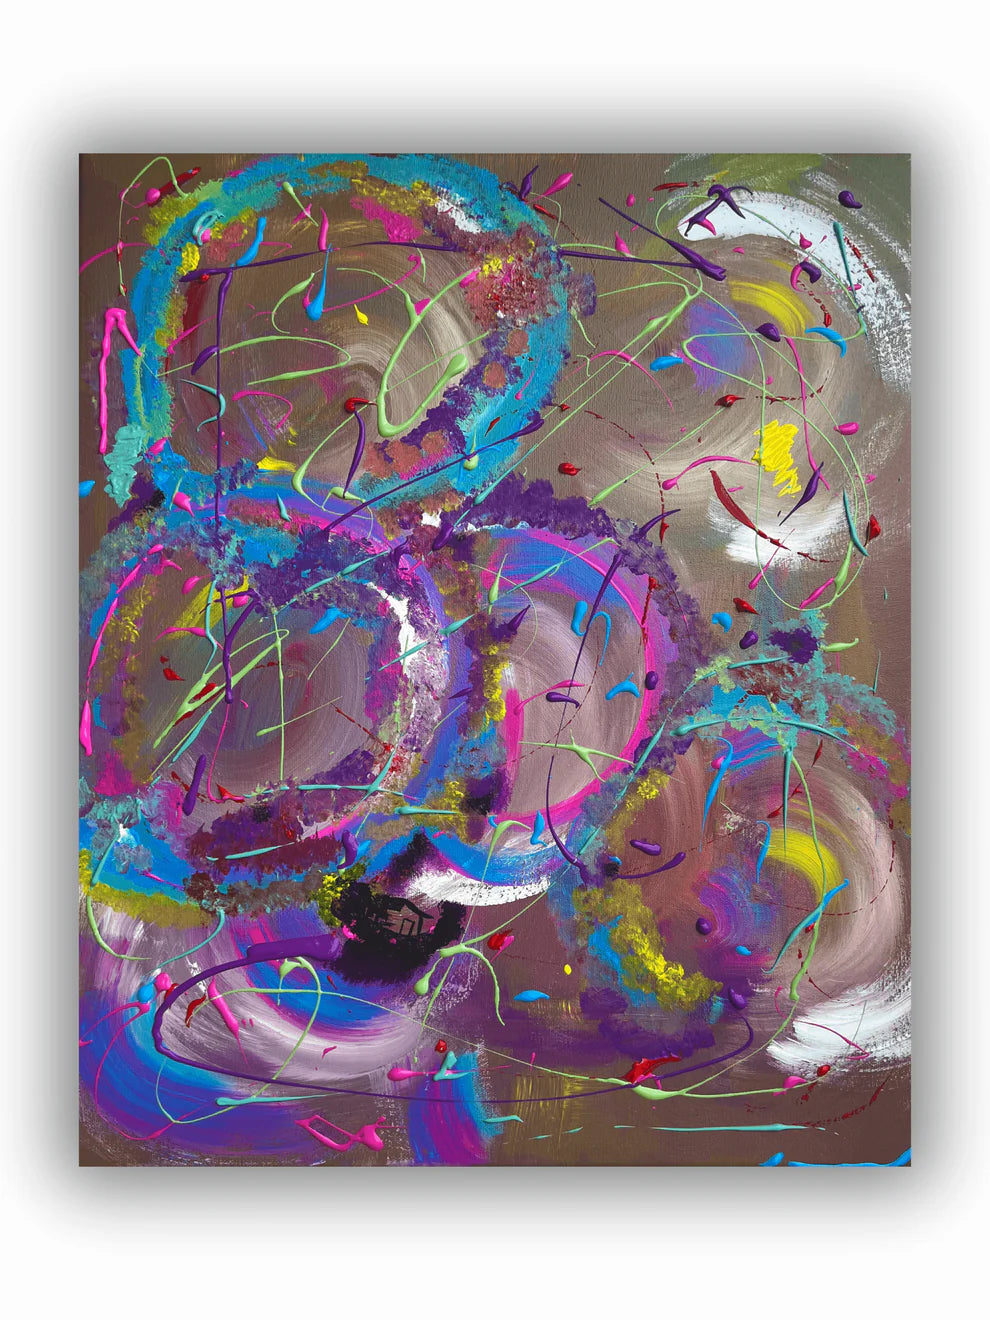 Abstract canvas painting titled 'Swept Away', with dynamic splashes and strokes in a fine art style.